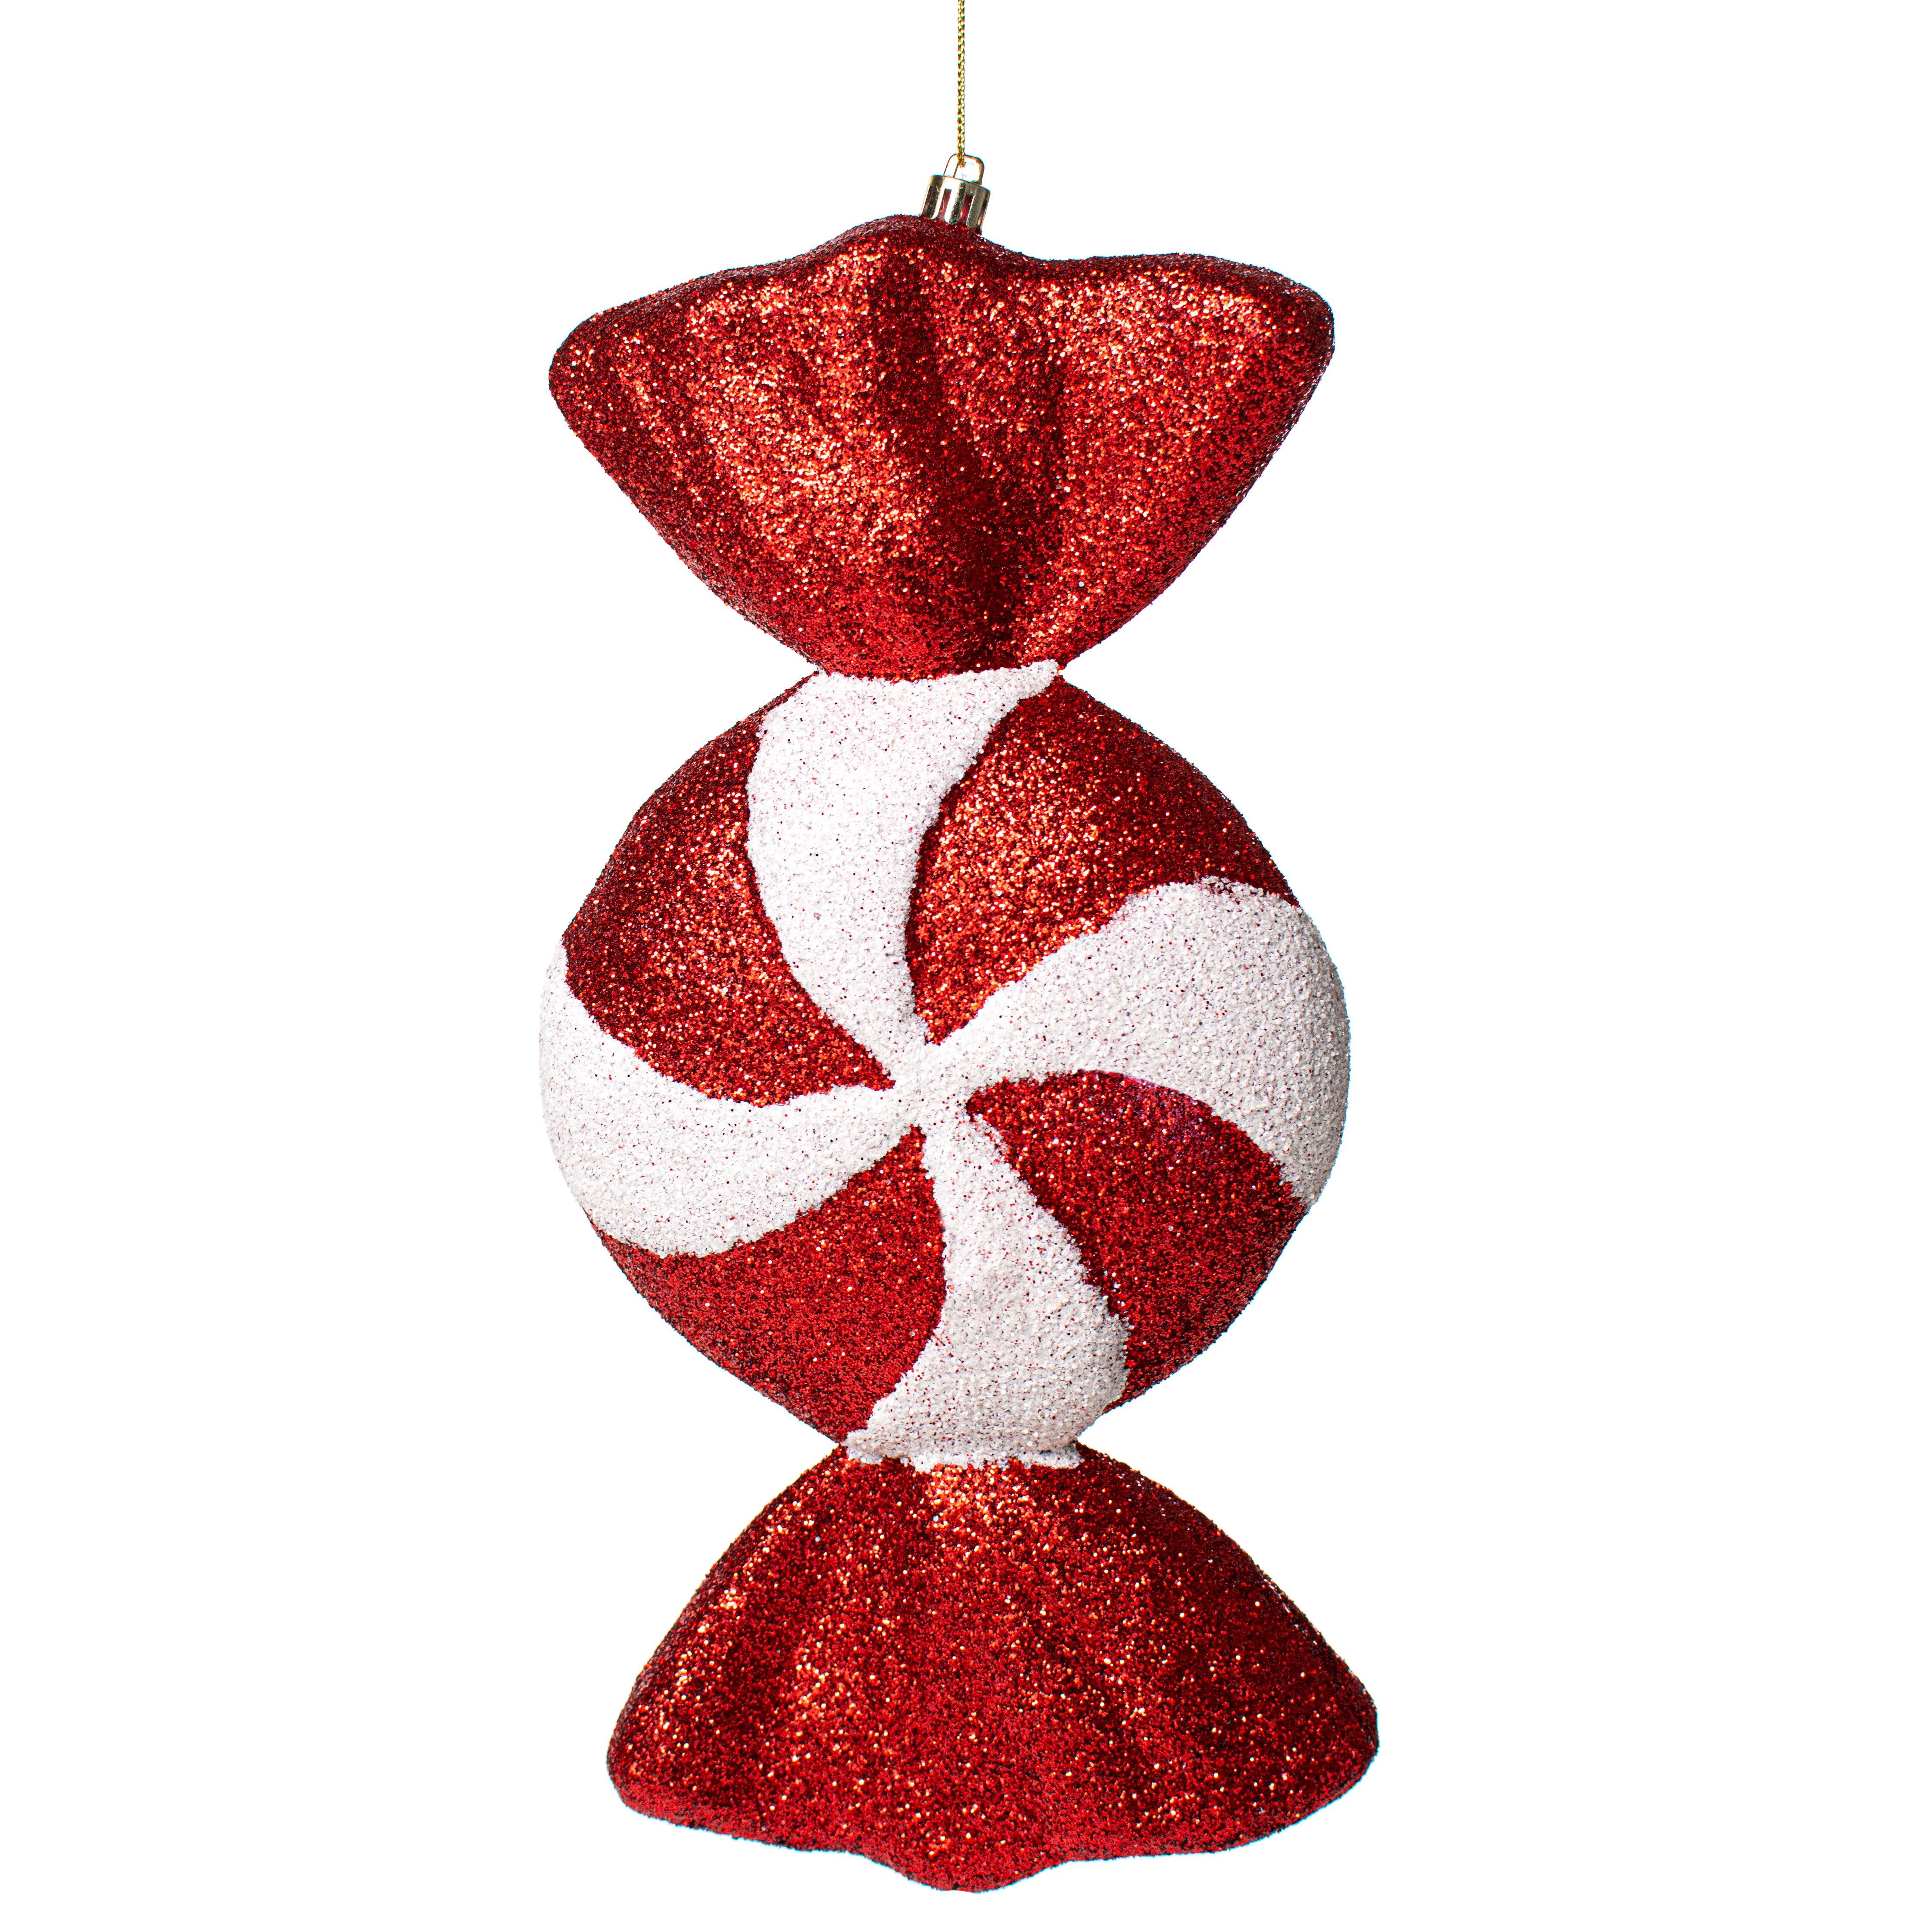 11" Glitter Peppermint Candy Ornament: Red